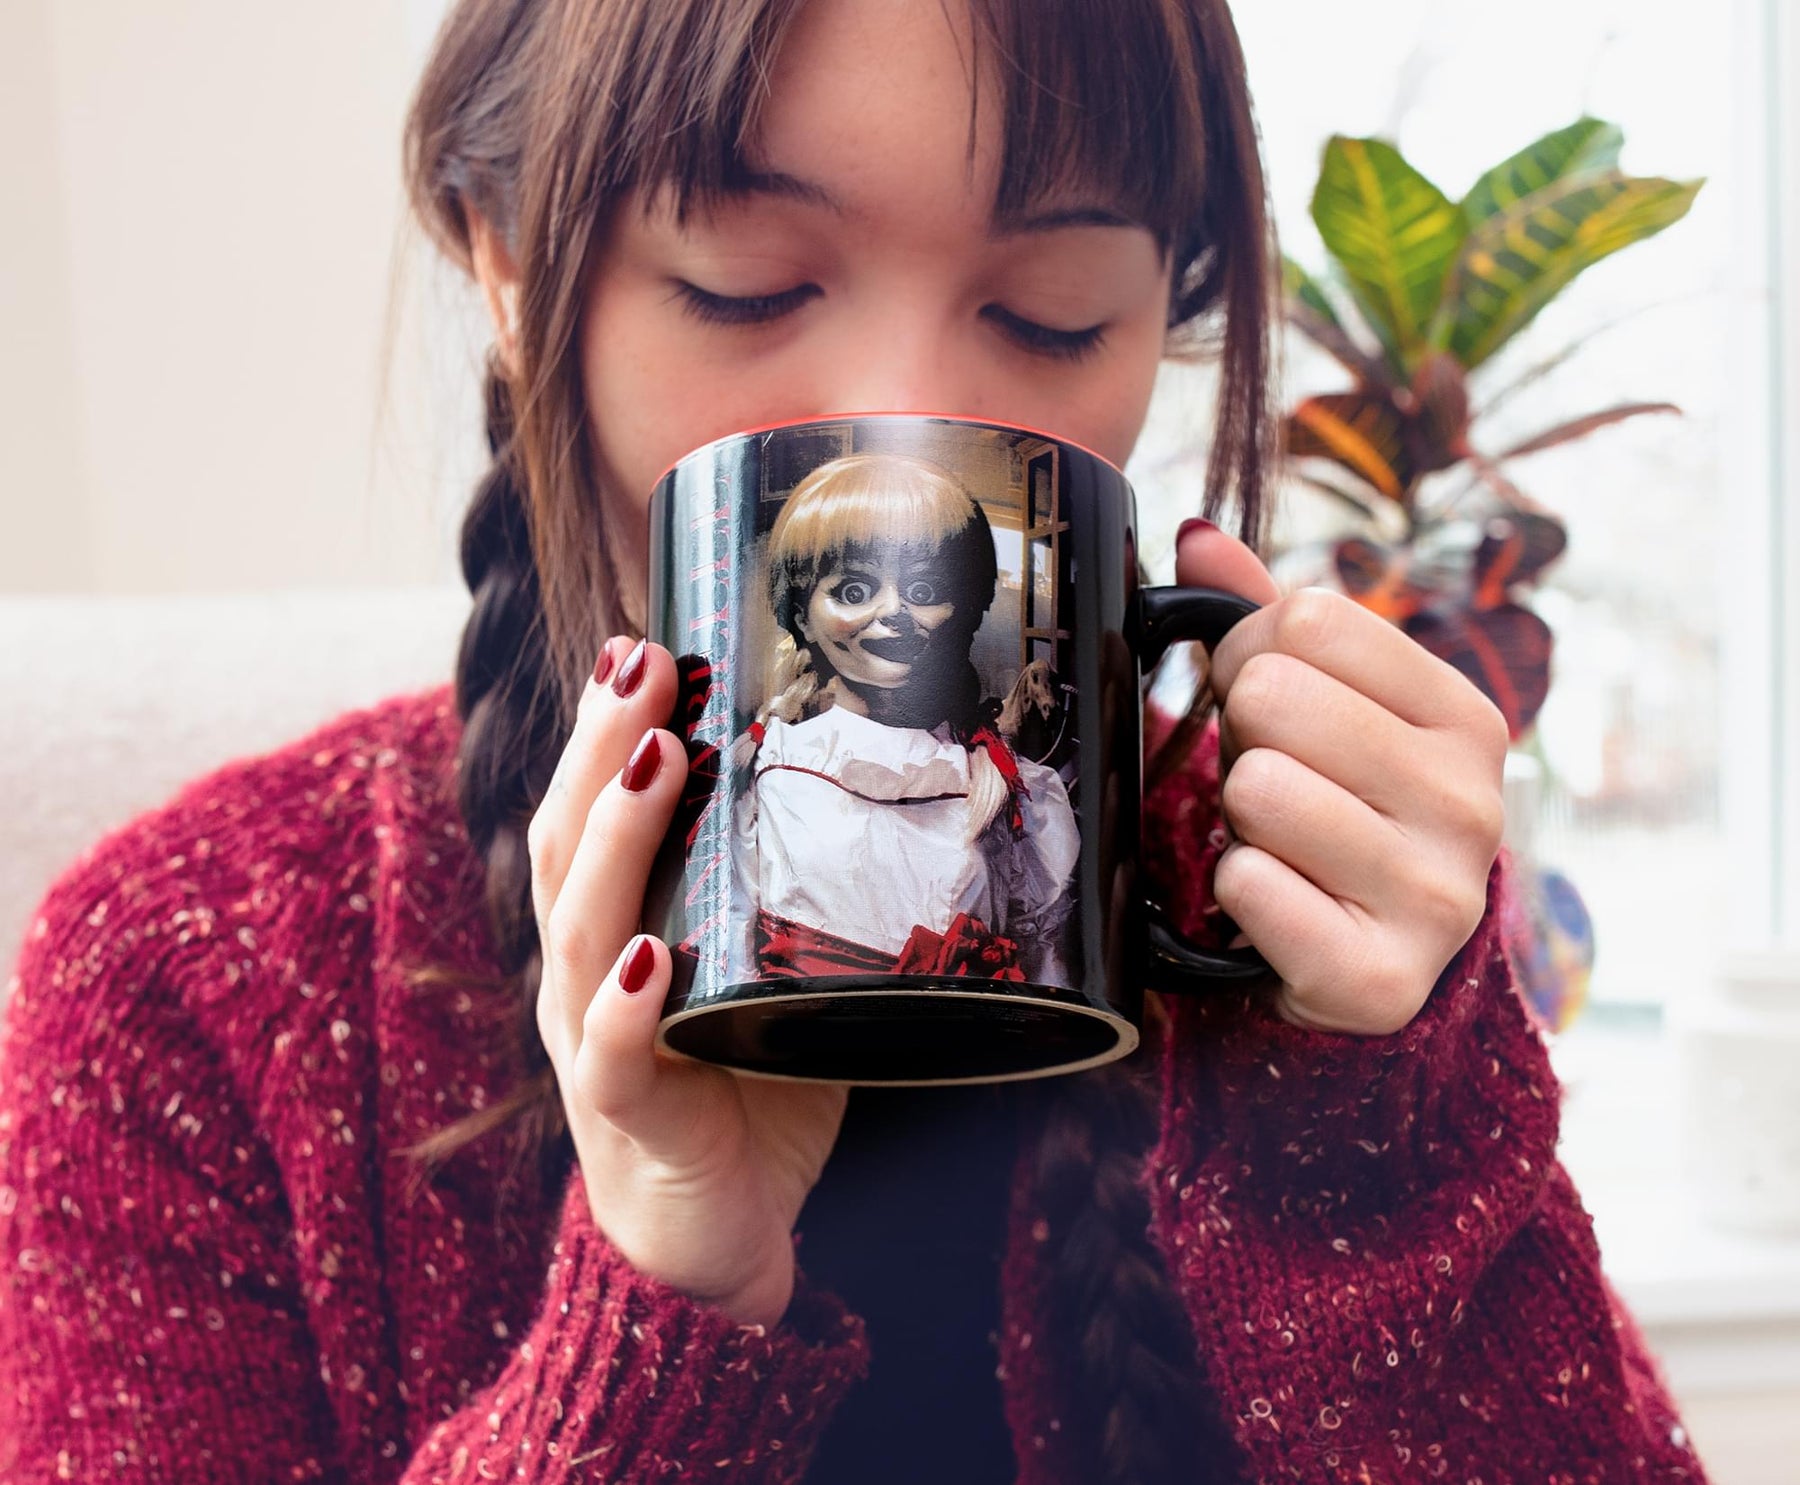 Annabelle The Conjuring Ceramic Mug | Holds 20 Ounces